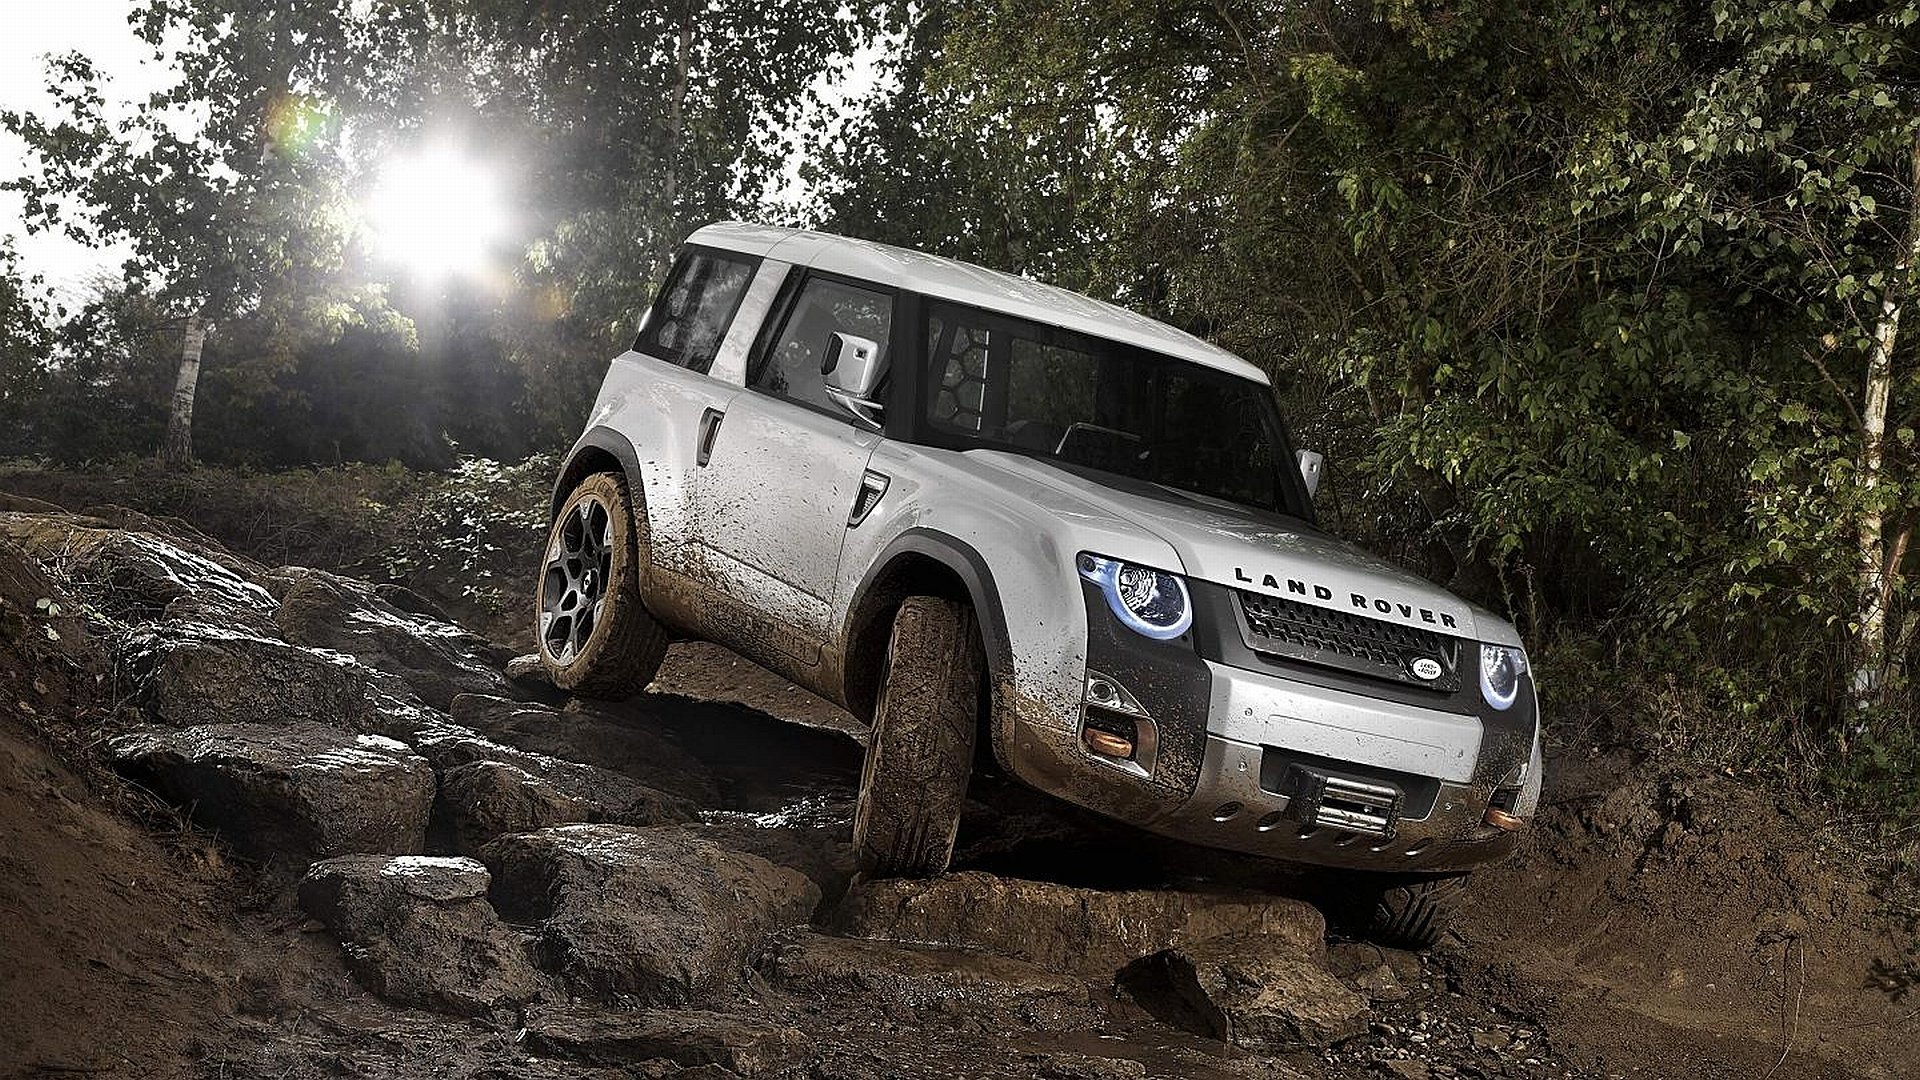 Download full hd 1920x1080 Land Rover Range Rover computer wallpaper ID:68513 for free